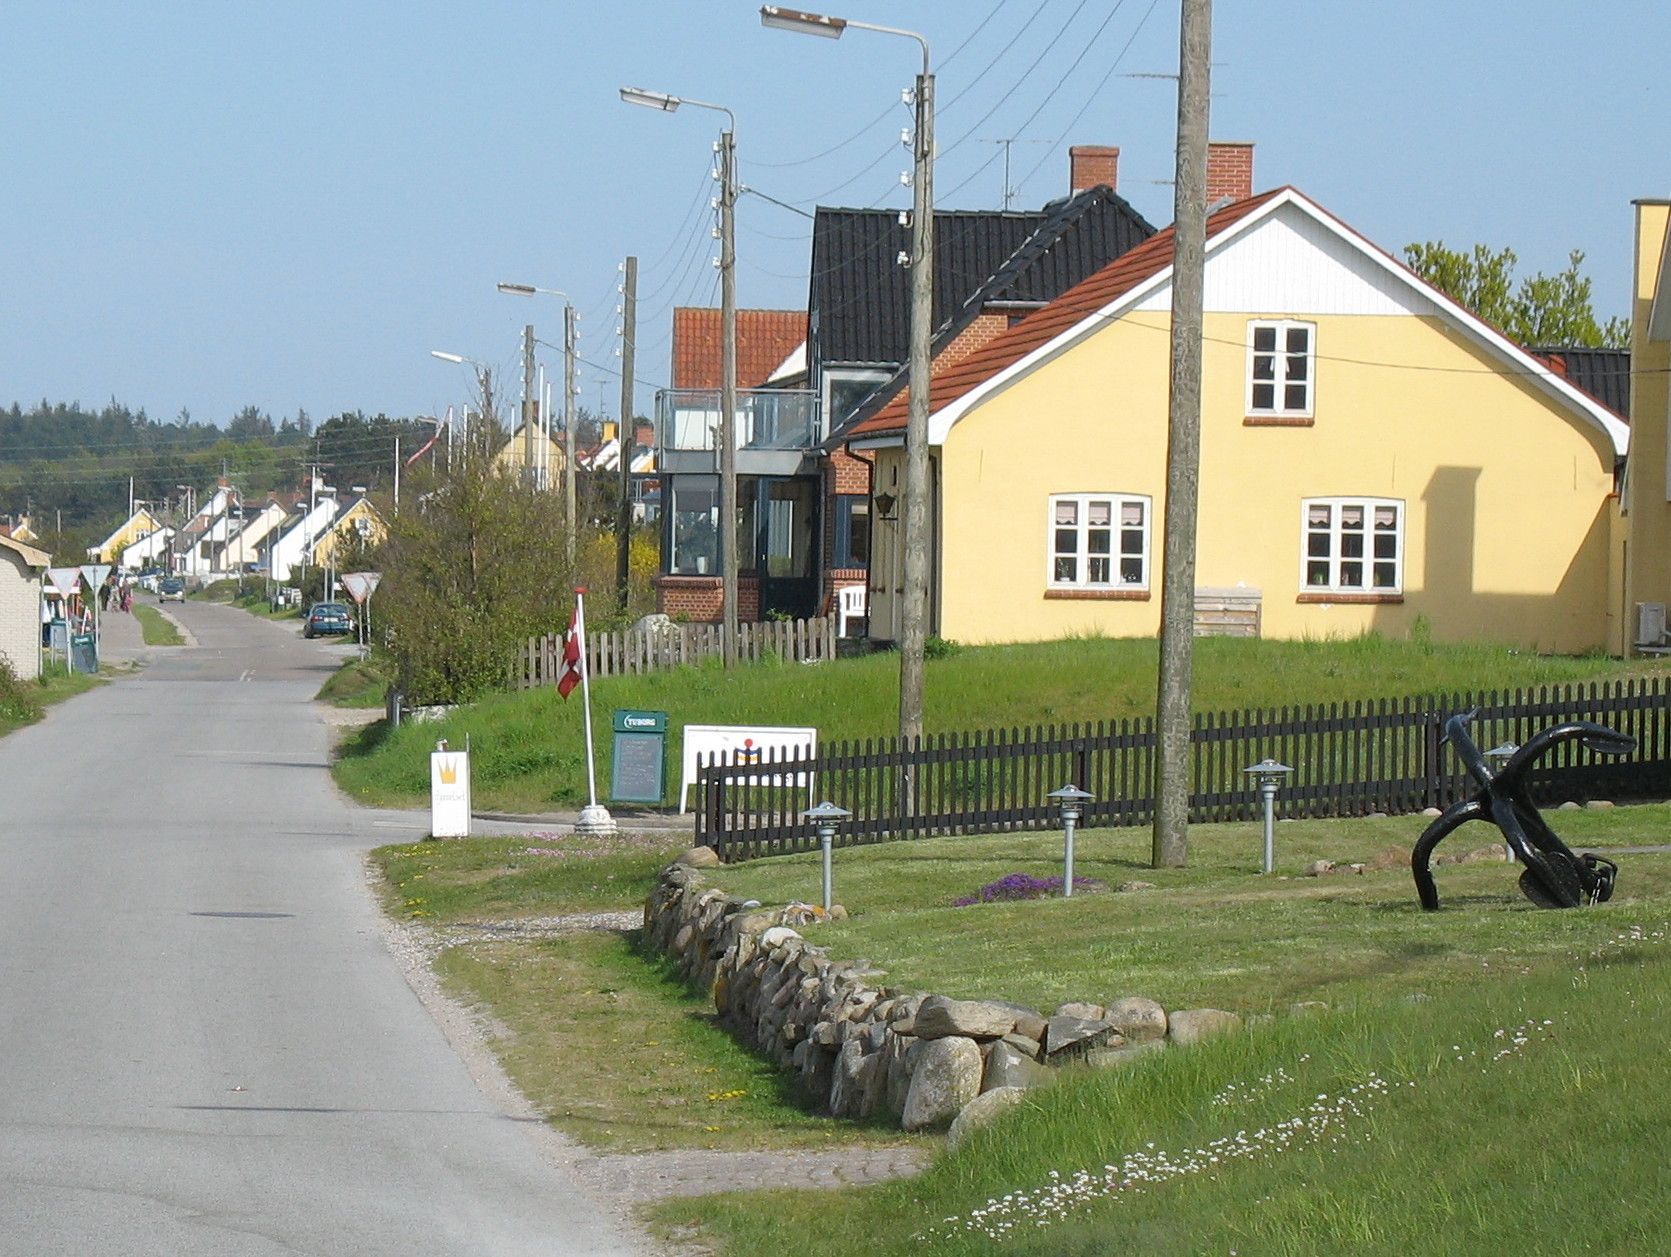 Increasing numbers of foreigners circumventing prohibitions and buying summer homes in Denmark